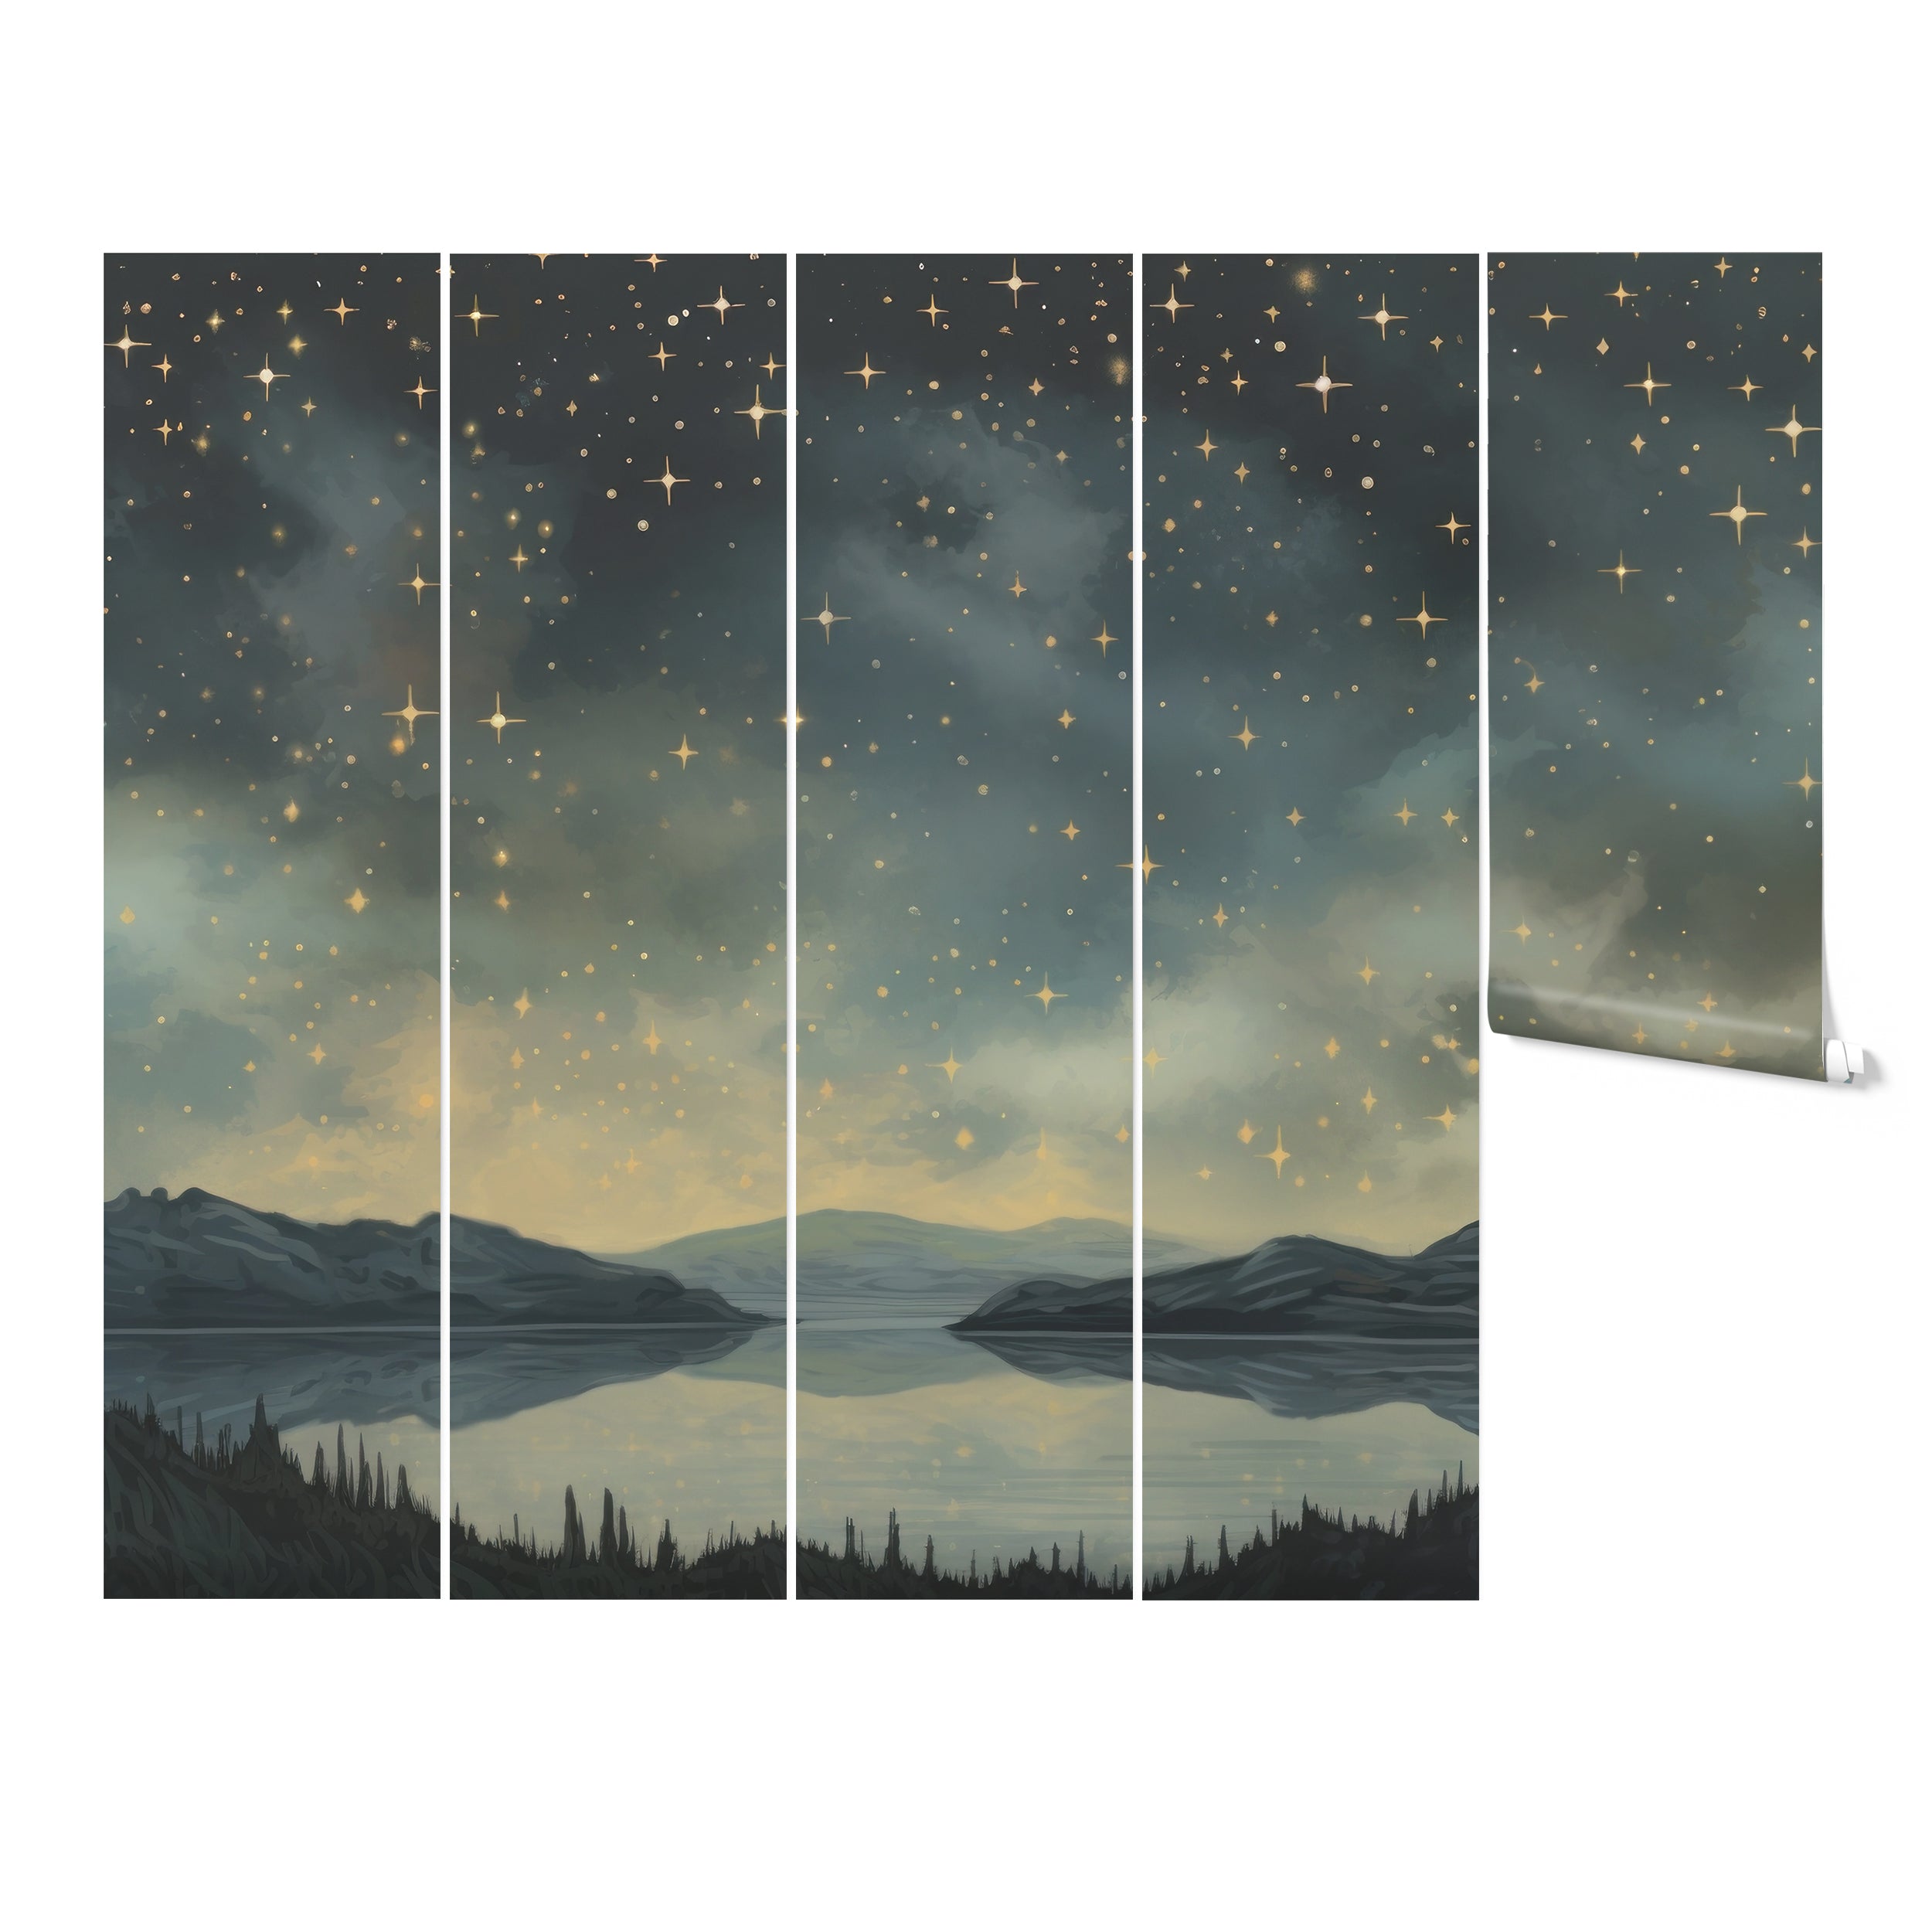 Rolls of "Canoe Lake" mural wallpaper featuring a star-filled sky and a serene lakeside mountain view, ready for installation.